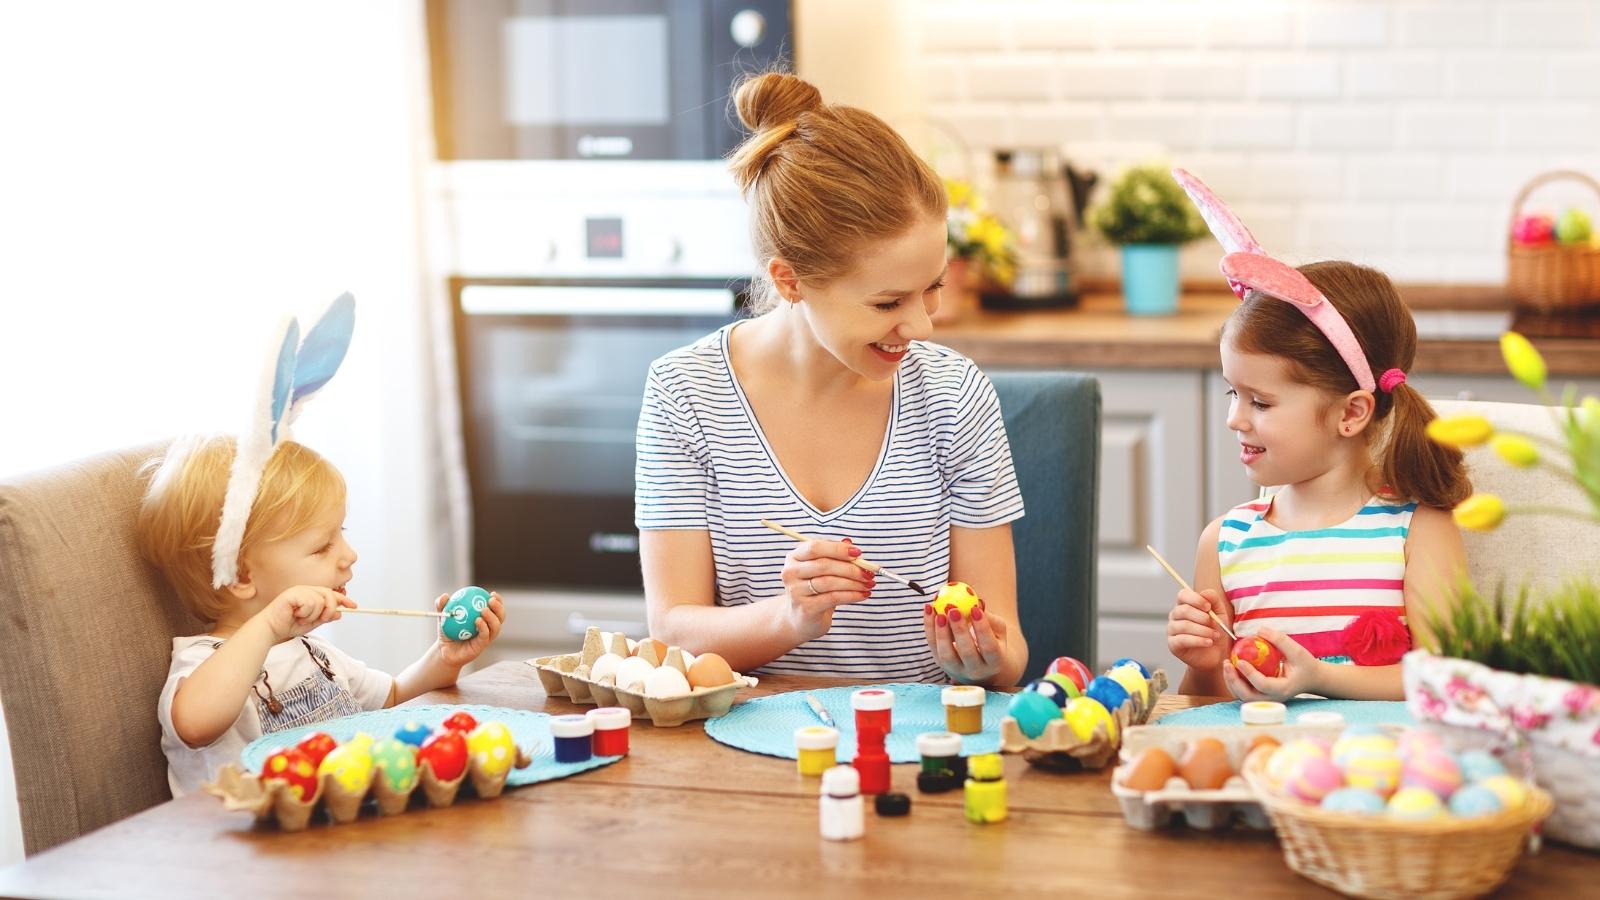 FUN ACTIVITIES TO DO WITH YOUR FAMILY AND FRIENDS THIS EASTER